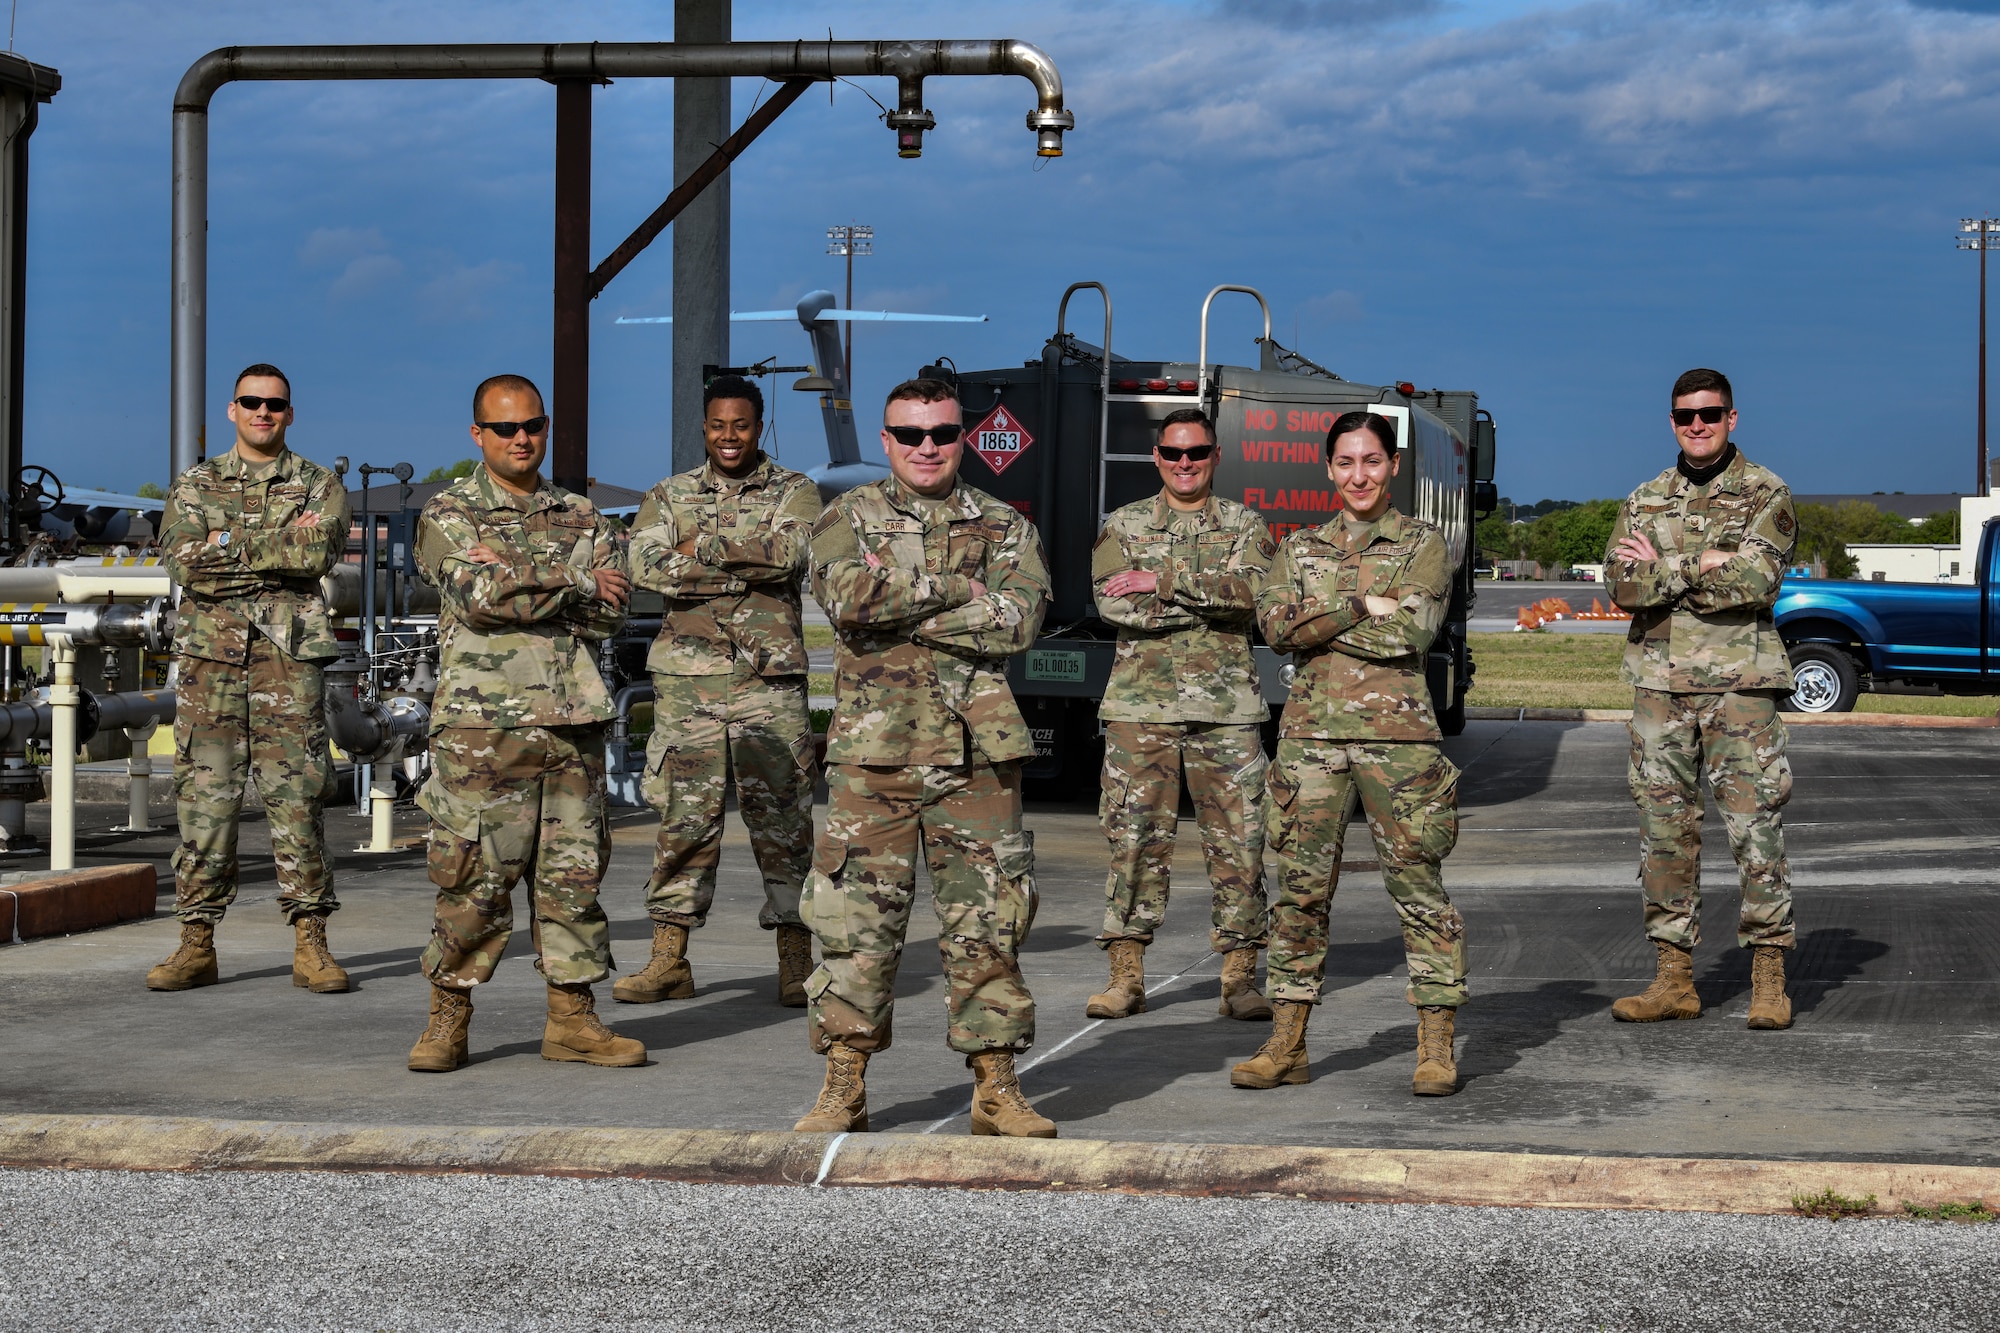 Members of the 910th LRS traveled to JB Charleston to conduct training on an active duty installation to ensure they remain combat-ready.